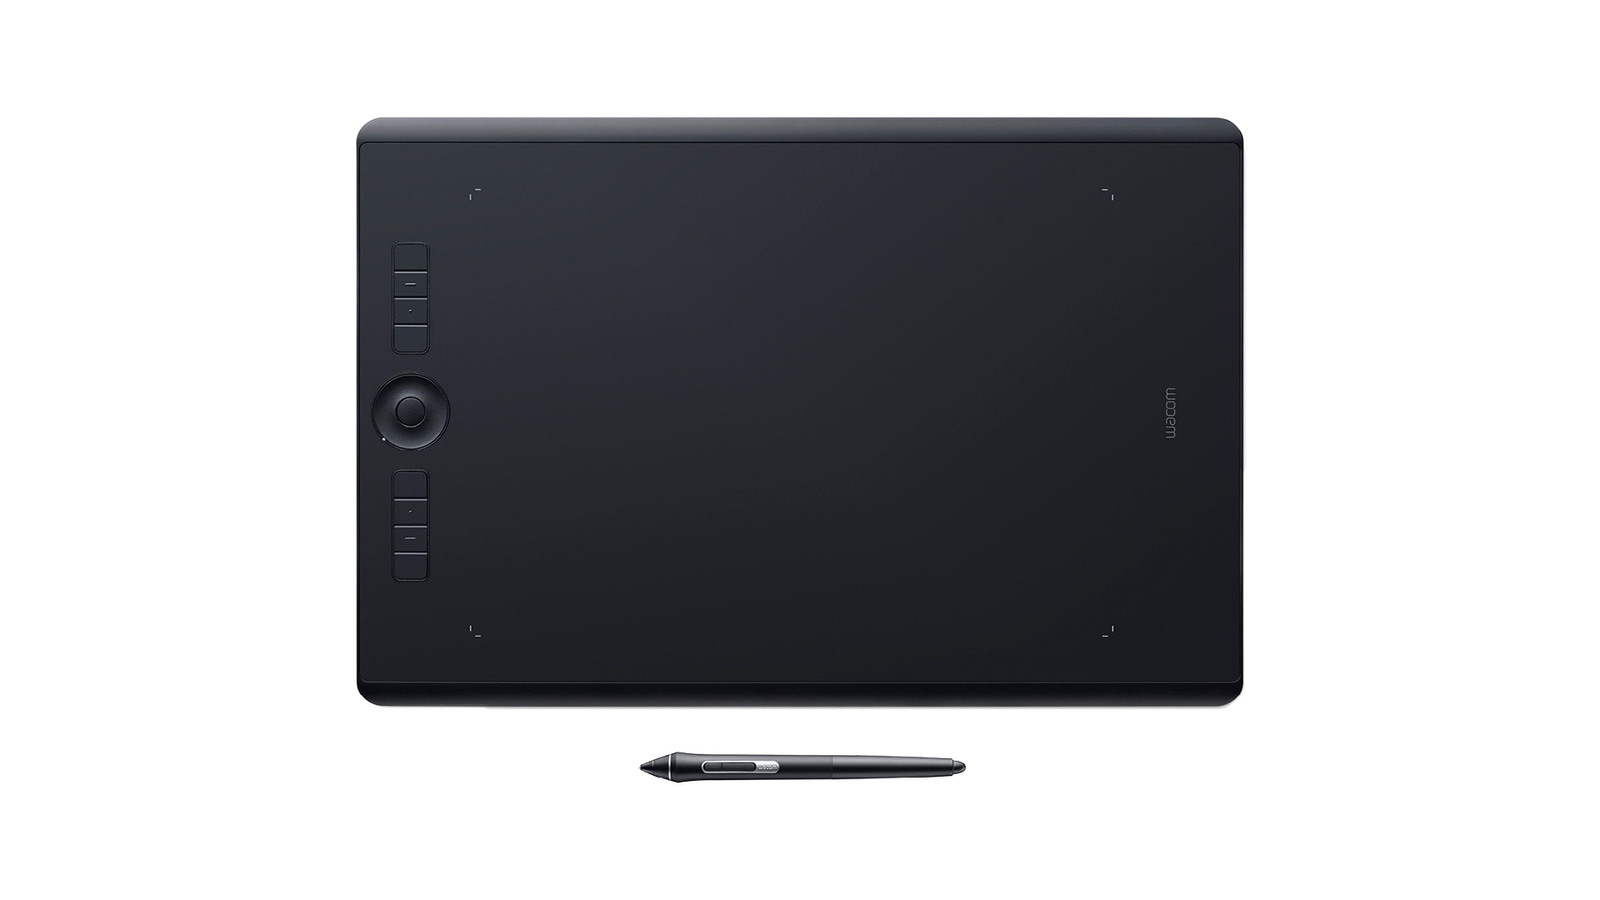 Wacom Intuos Pro (Large) - A great Wacom tablet with a fairly large drawing surface